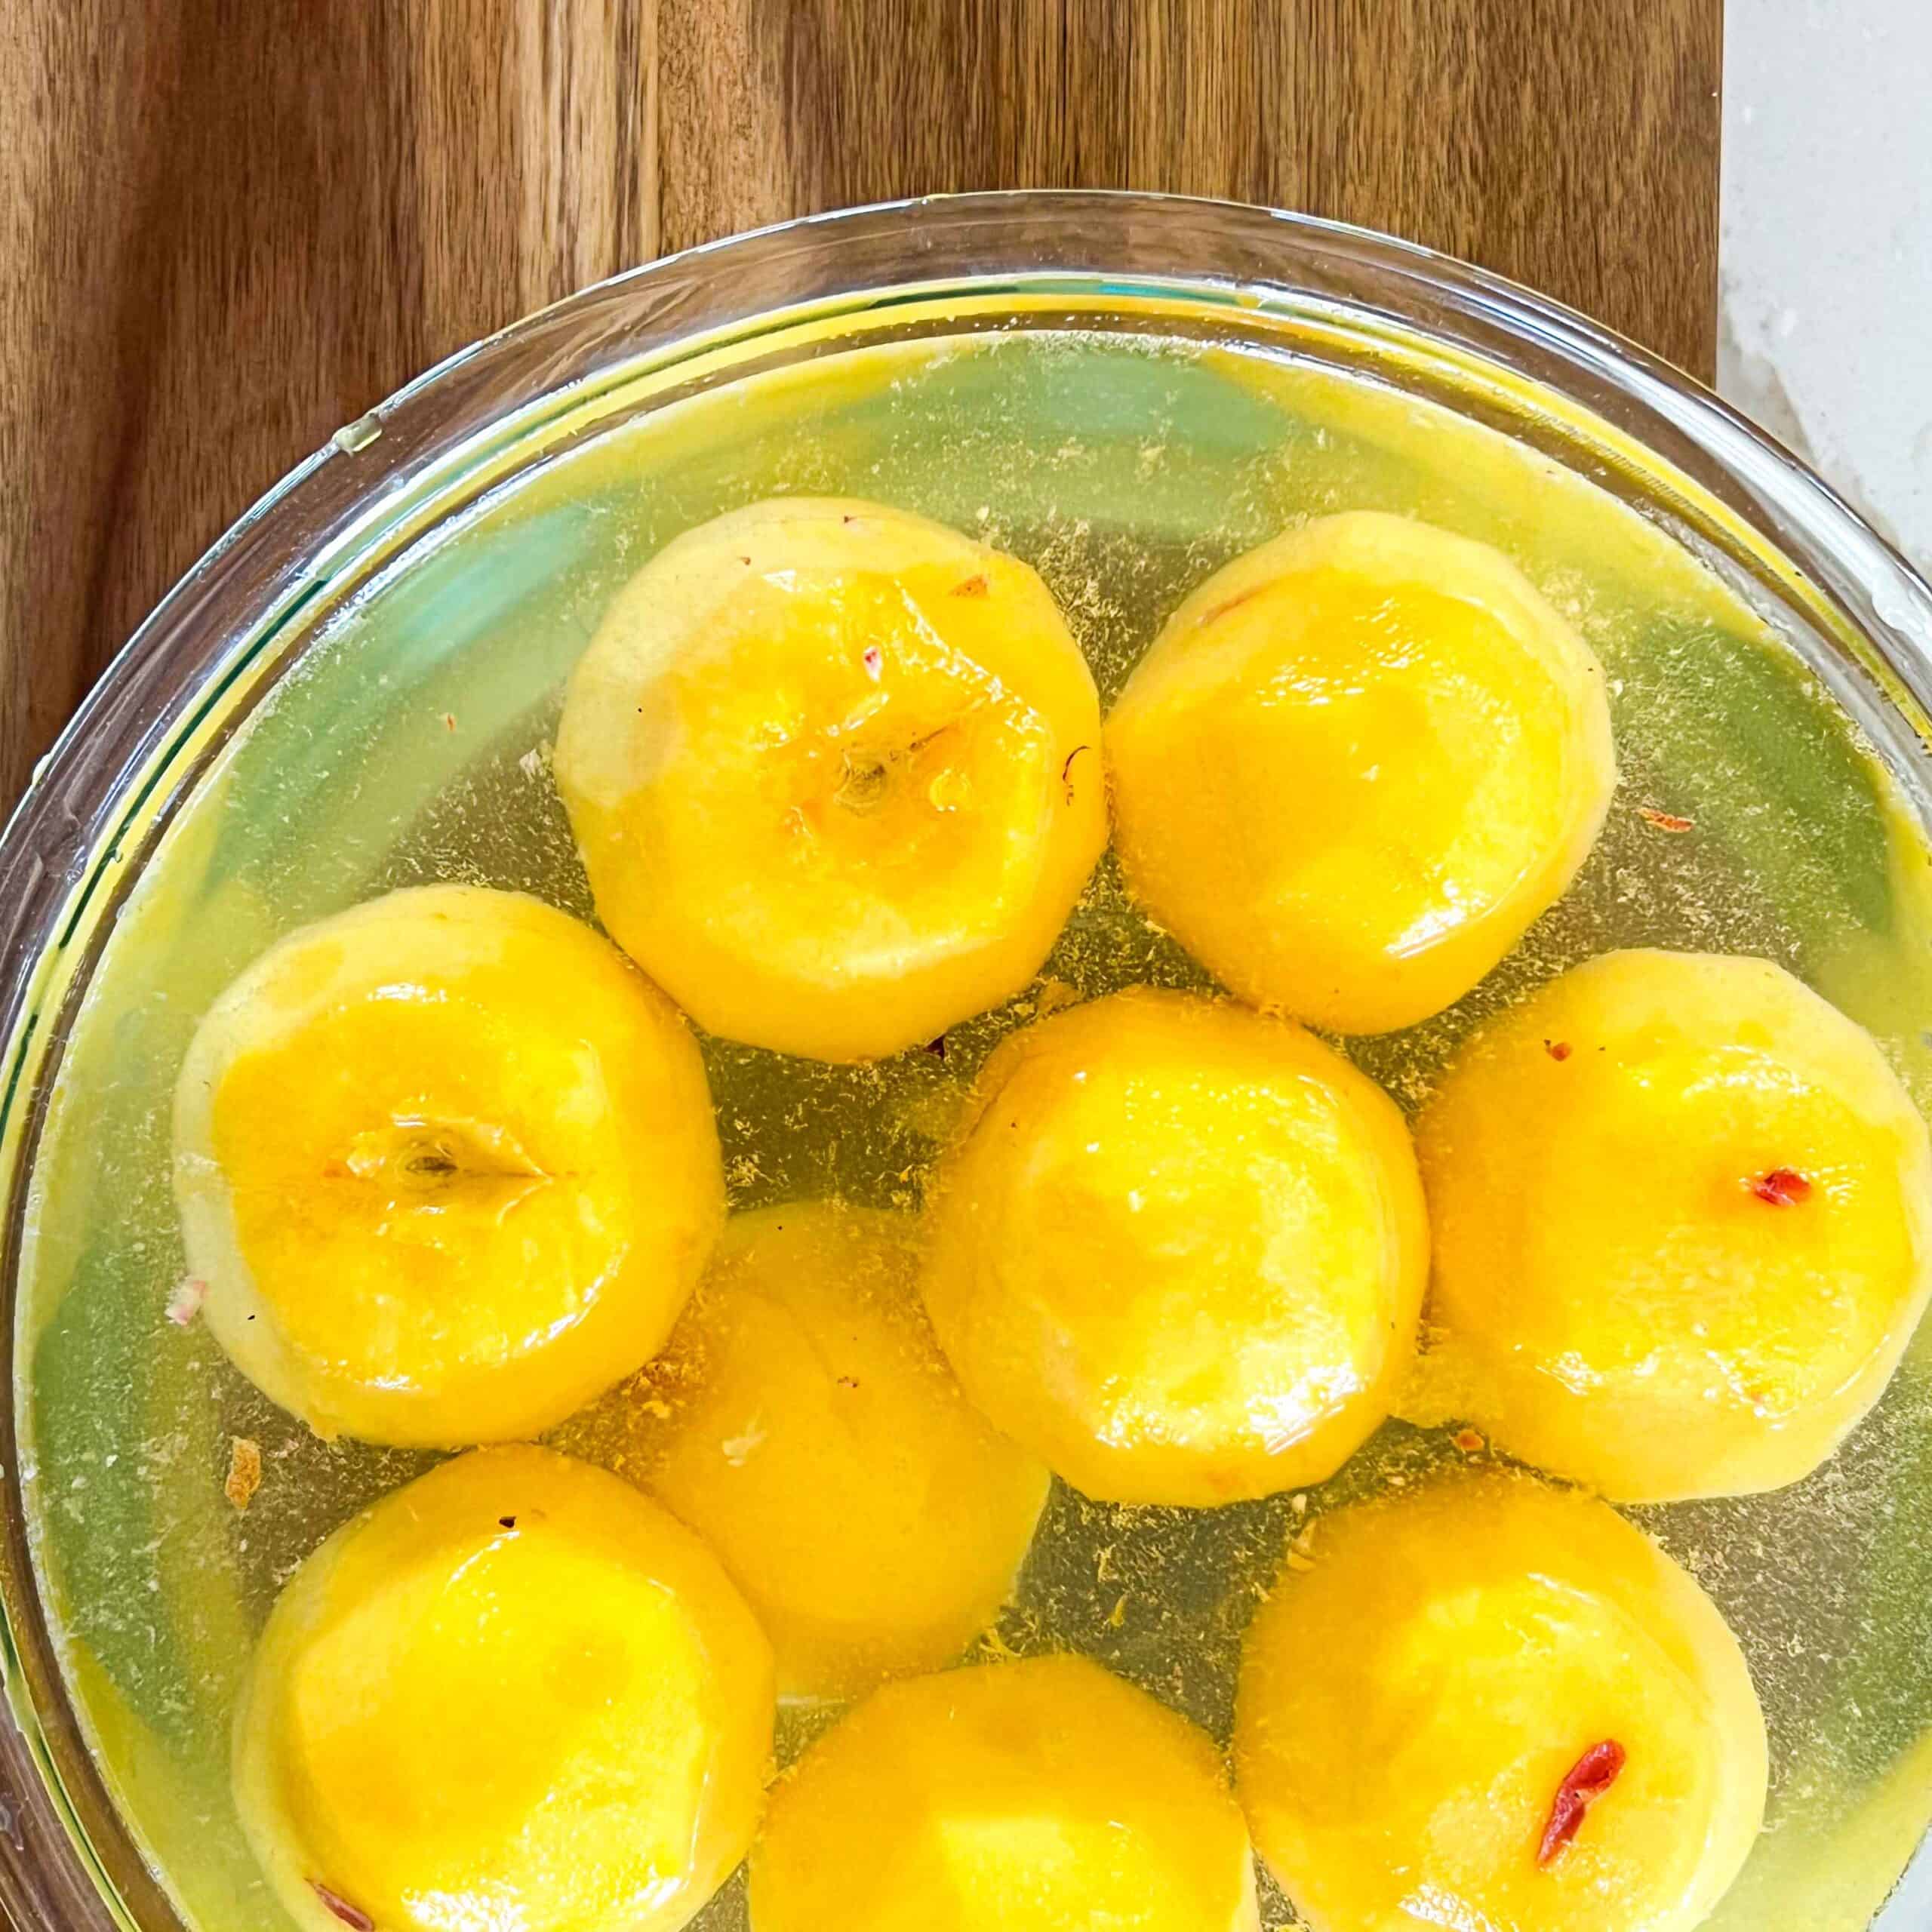 Peeled peaches in a large glass bowl with a lemon and water solution to keep them fresh.